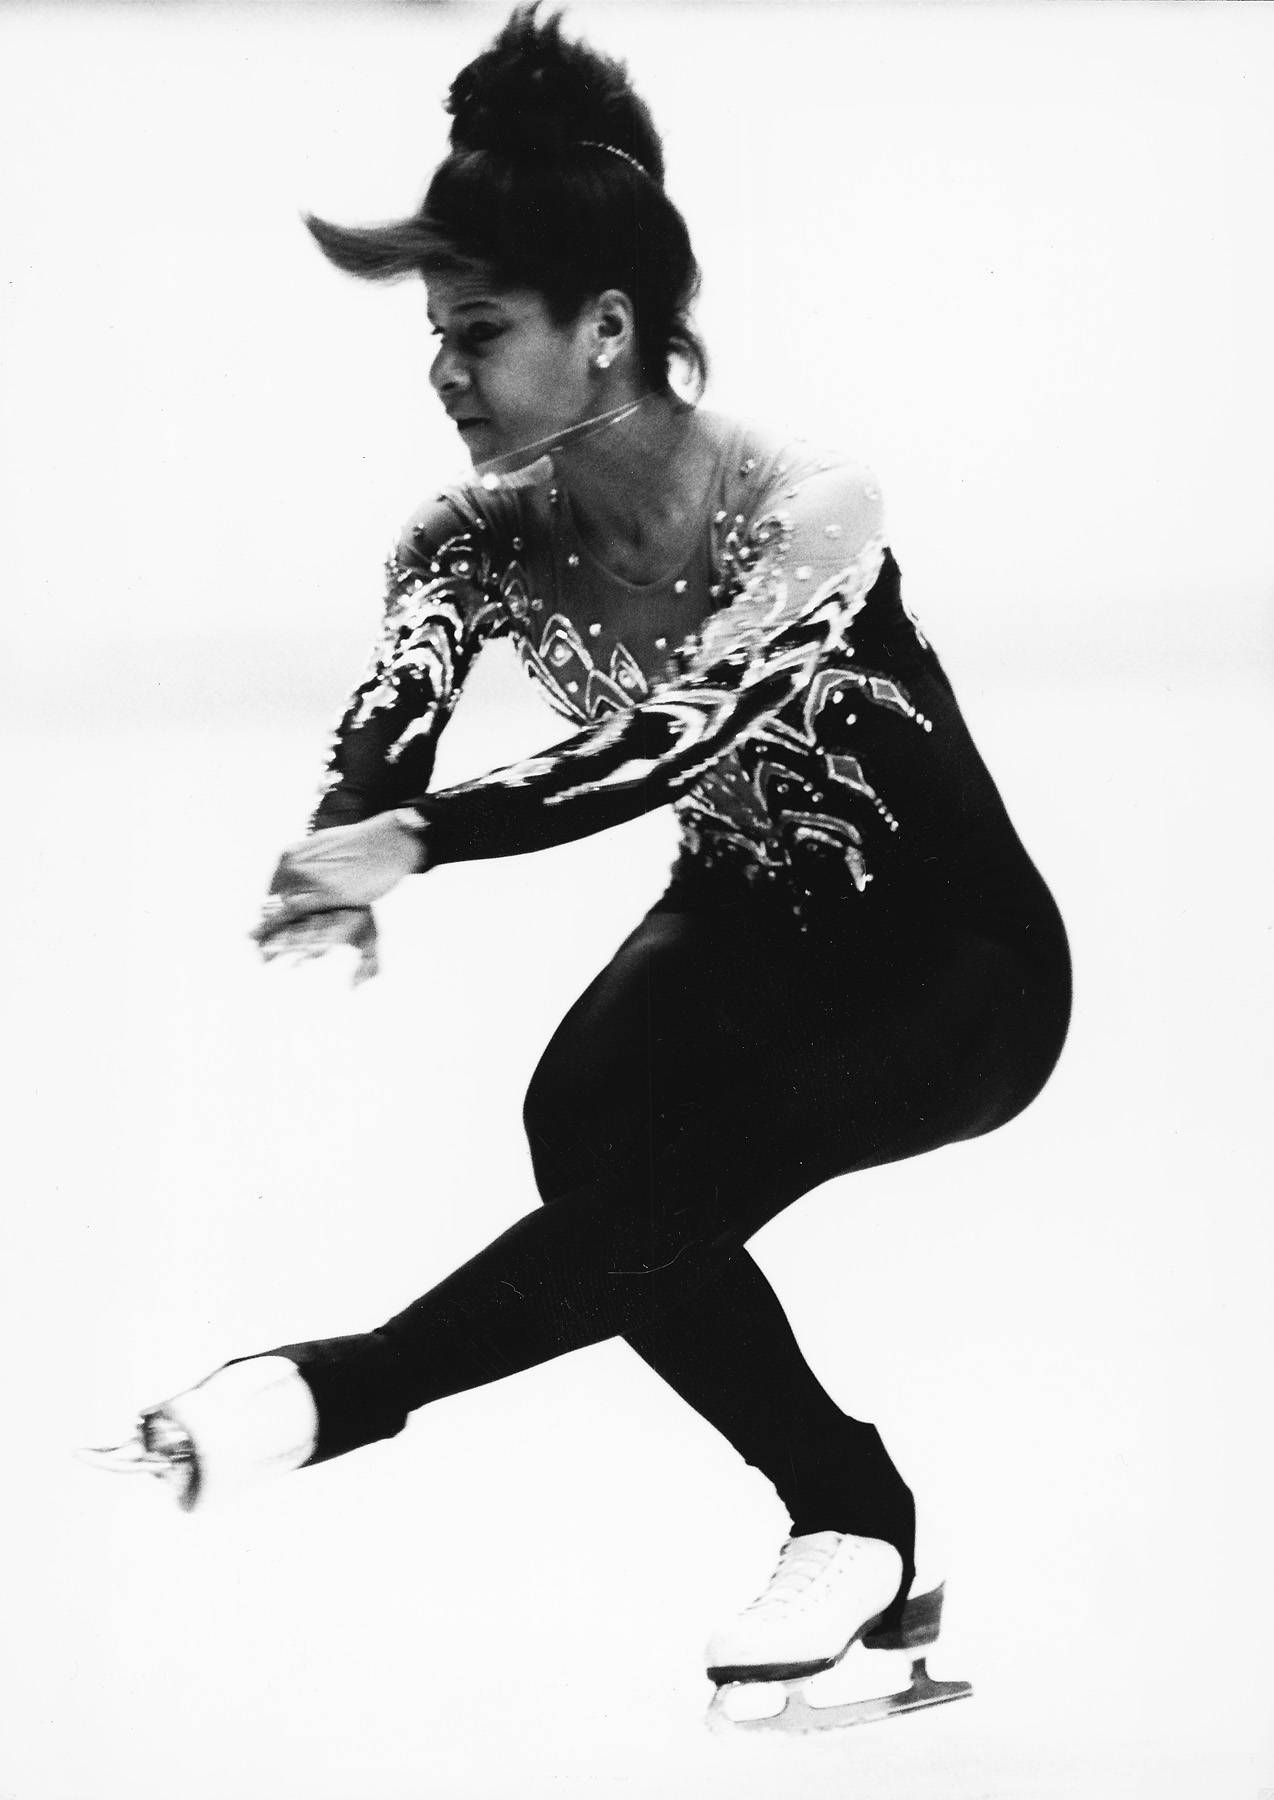 Debi Thomas - Olympian Debi Thomas has won many awards for figure skating. She became the first African-American to win a non-novice title at the 1986 U.S. Figure Skating Championships. Additionally, she won the bronze at the 1988 Winter Olympics, becoming the first African-American to win a medal in the Winter Olympics.(Photo: Hulton Archive/Getty Images)